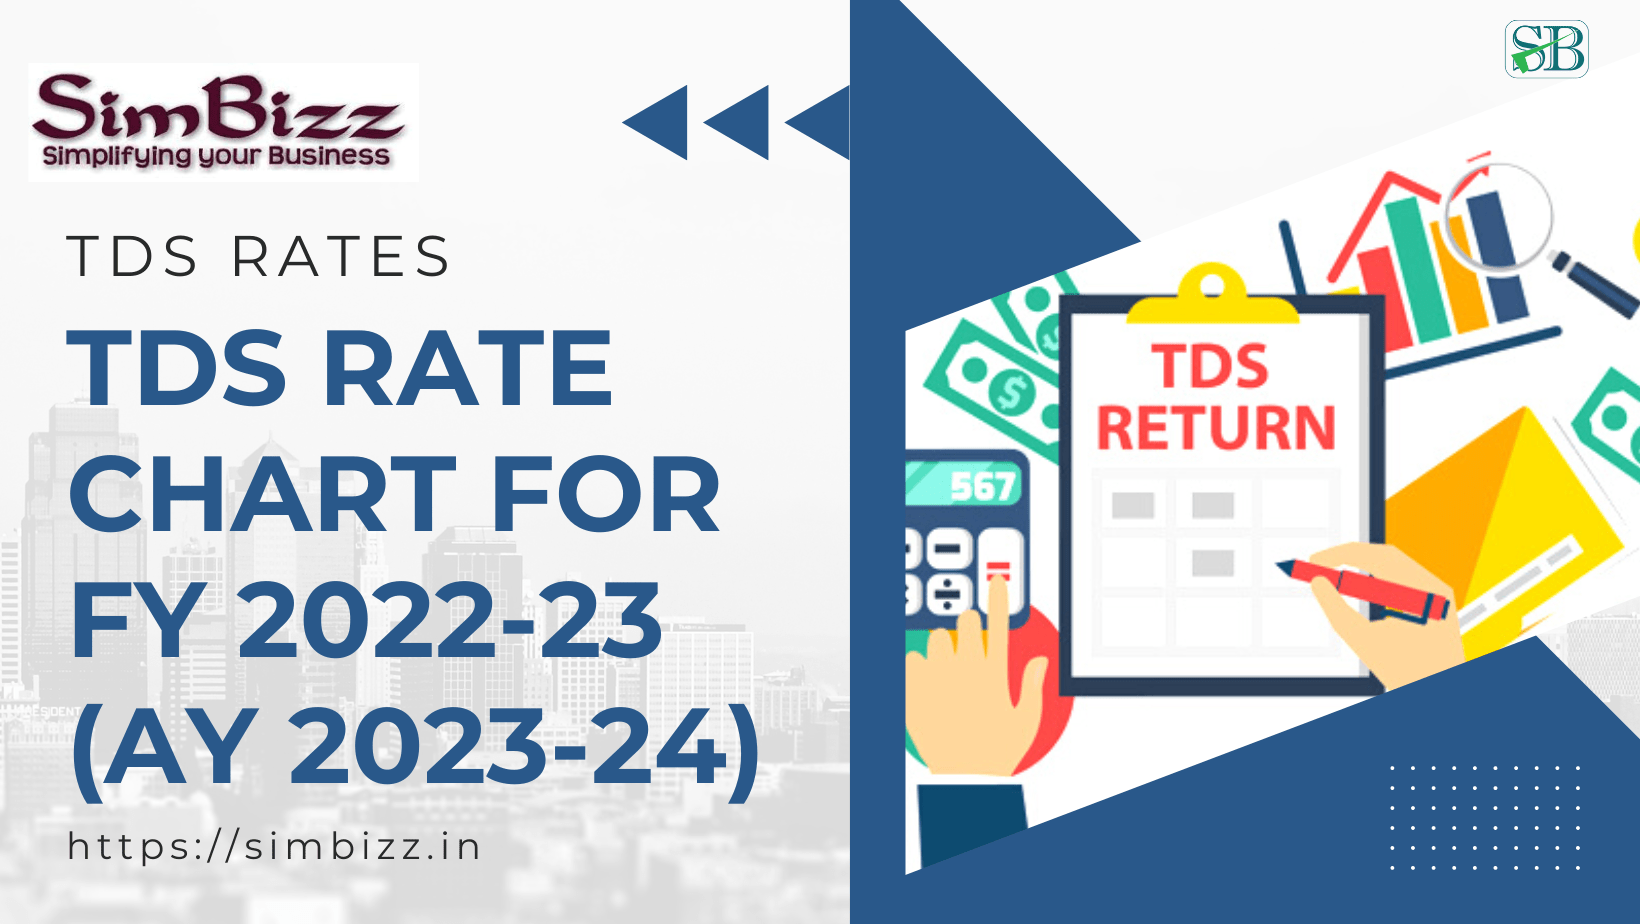 tds-rate-chart-for-fy-2022-23-ay-2023-24-simbizz